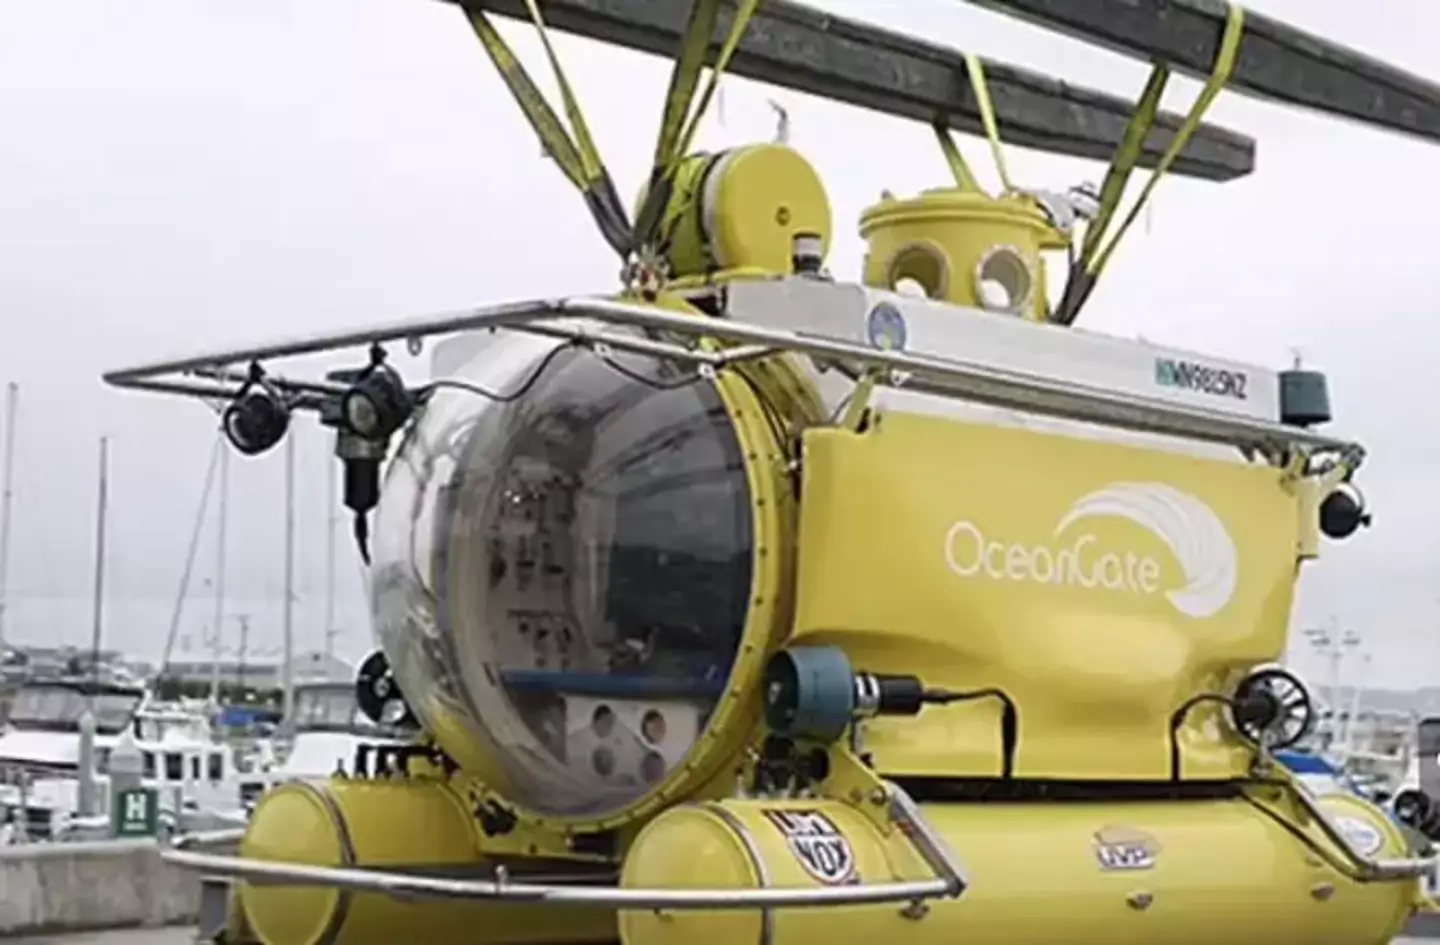 The Antipodes OceanGate submersible.